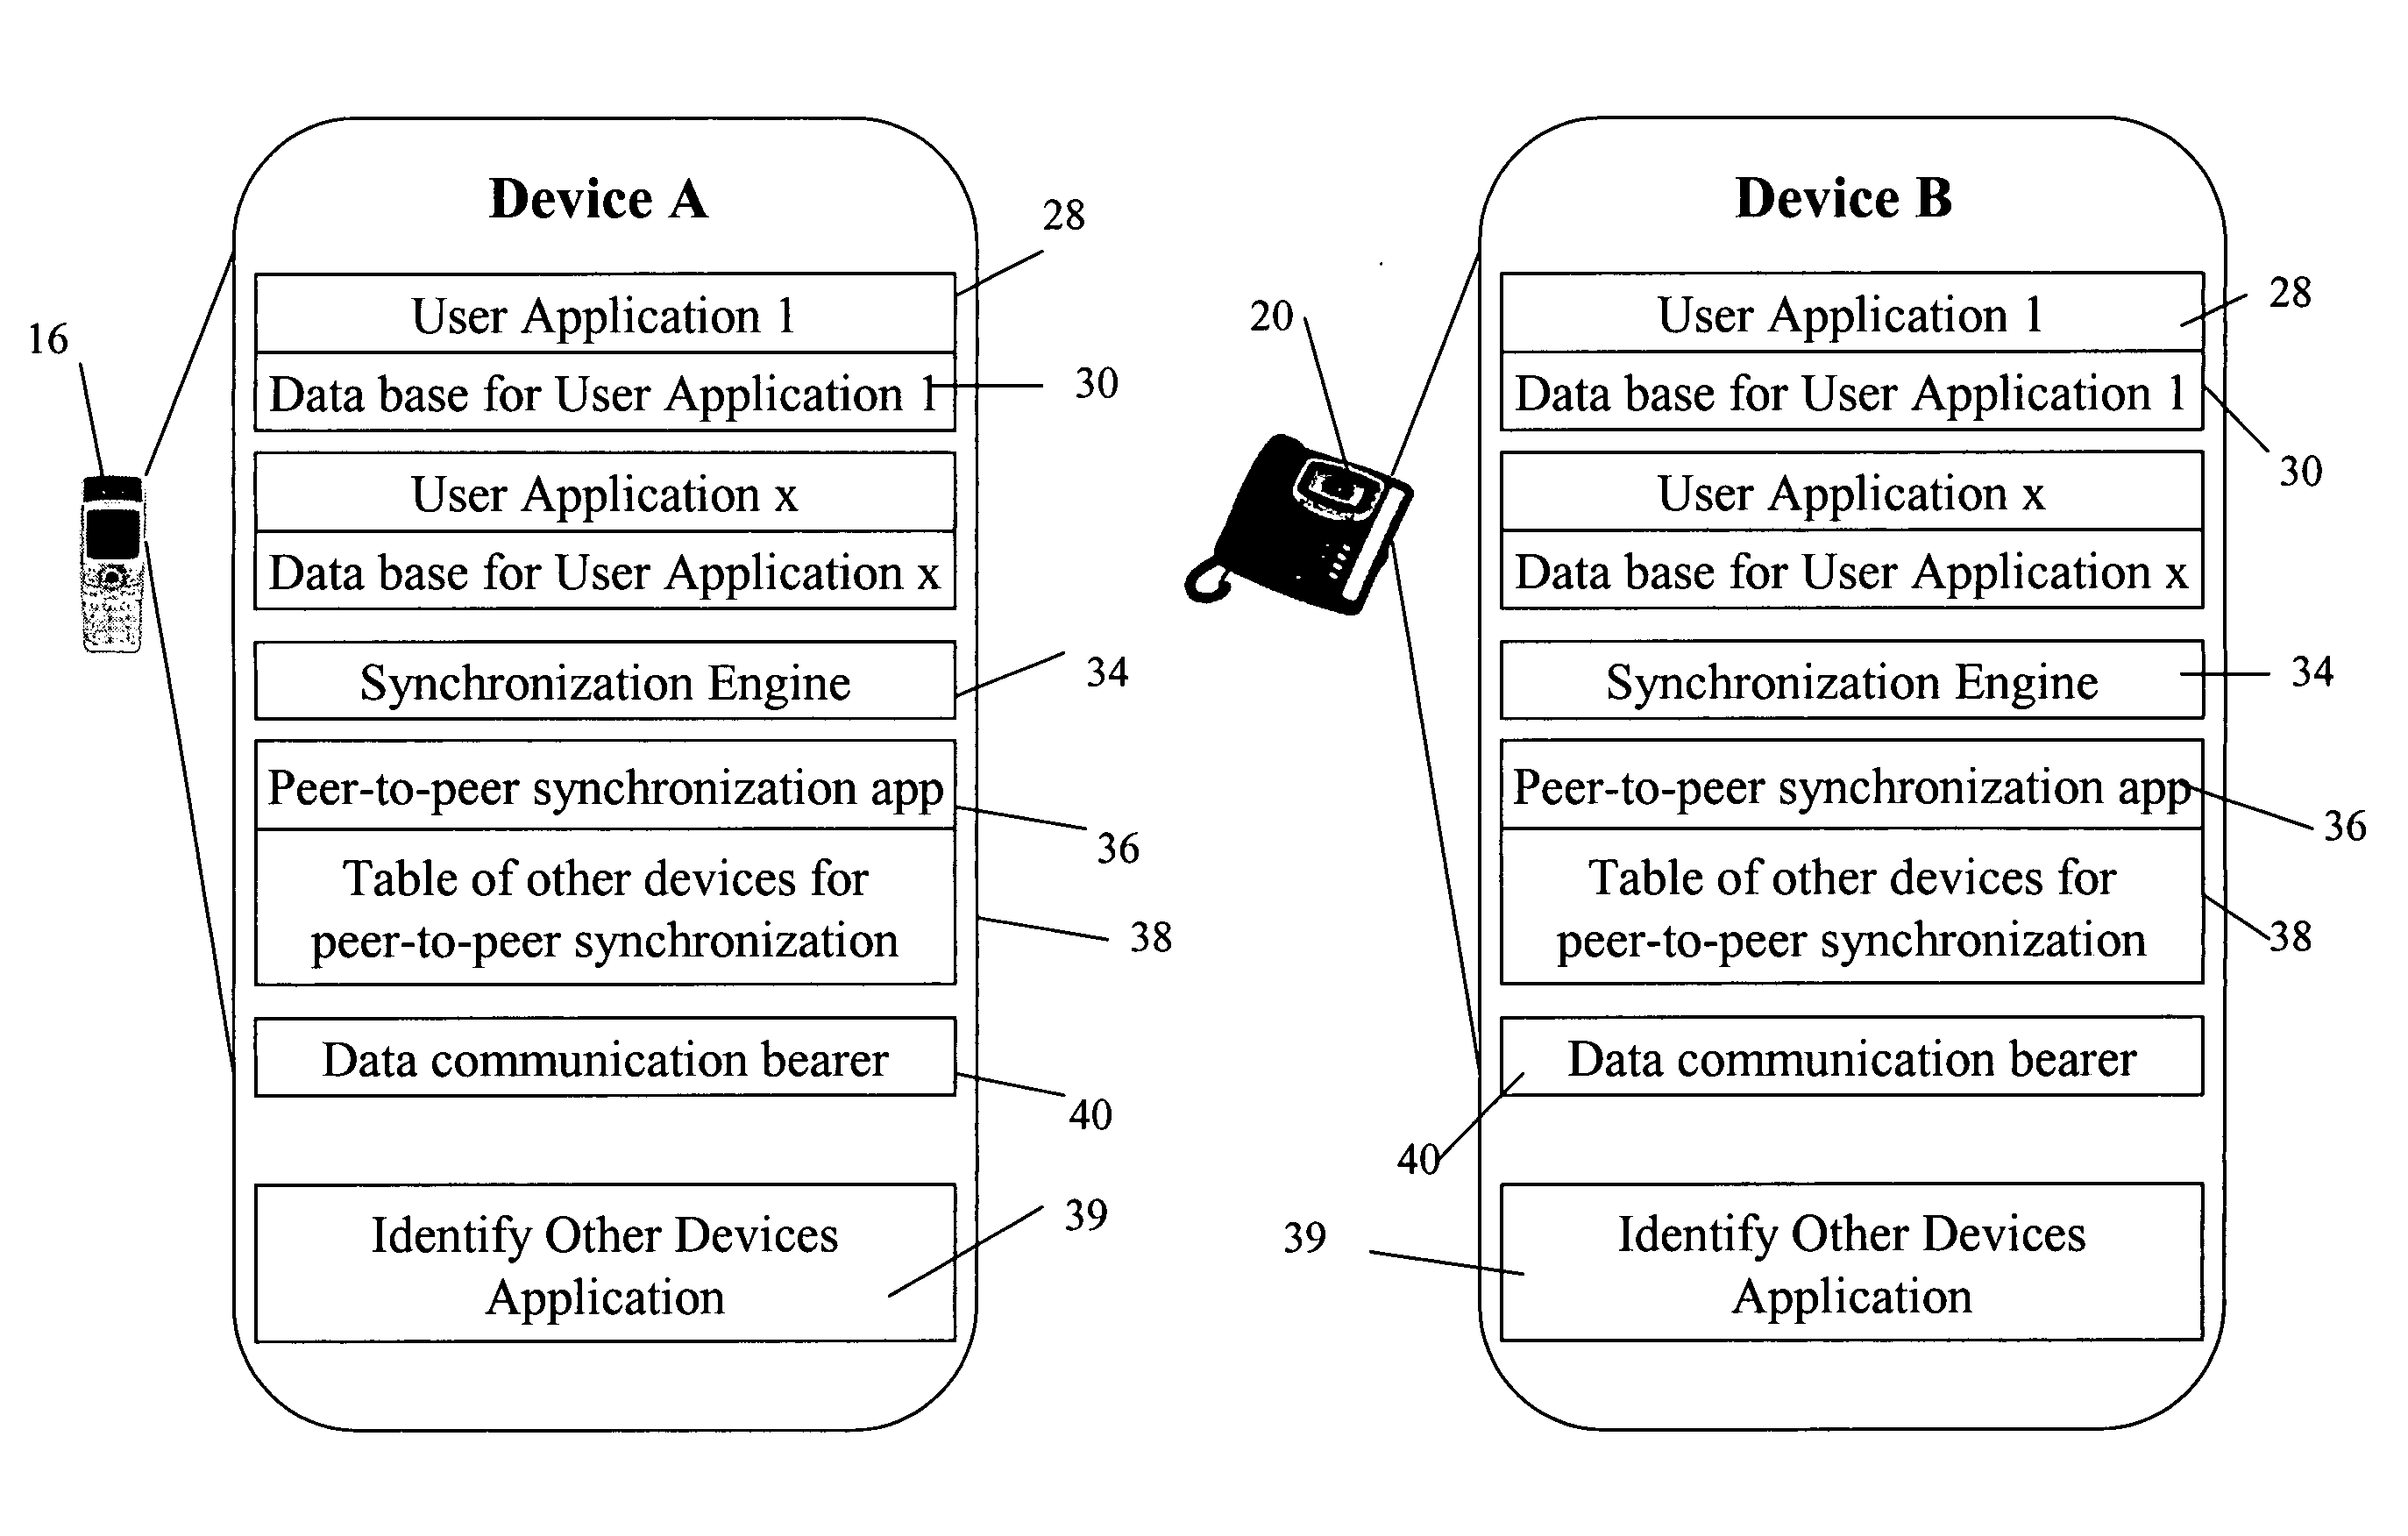 Peer-to-peer synchronization of data between devices